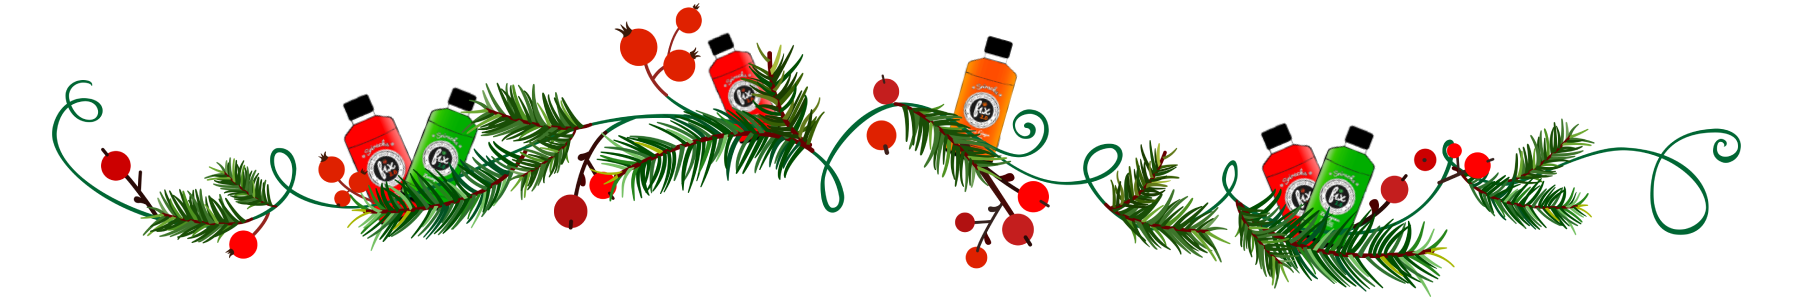 Find Fixie graphic depicting a garland with hot sauce bottles